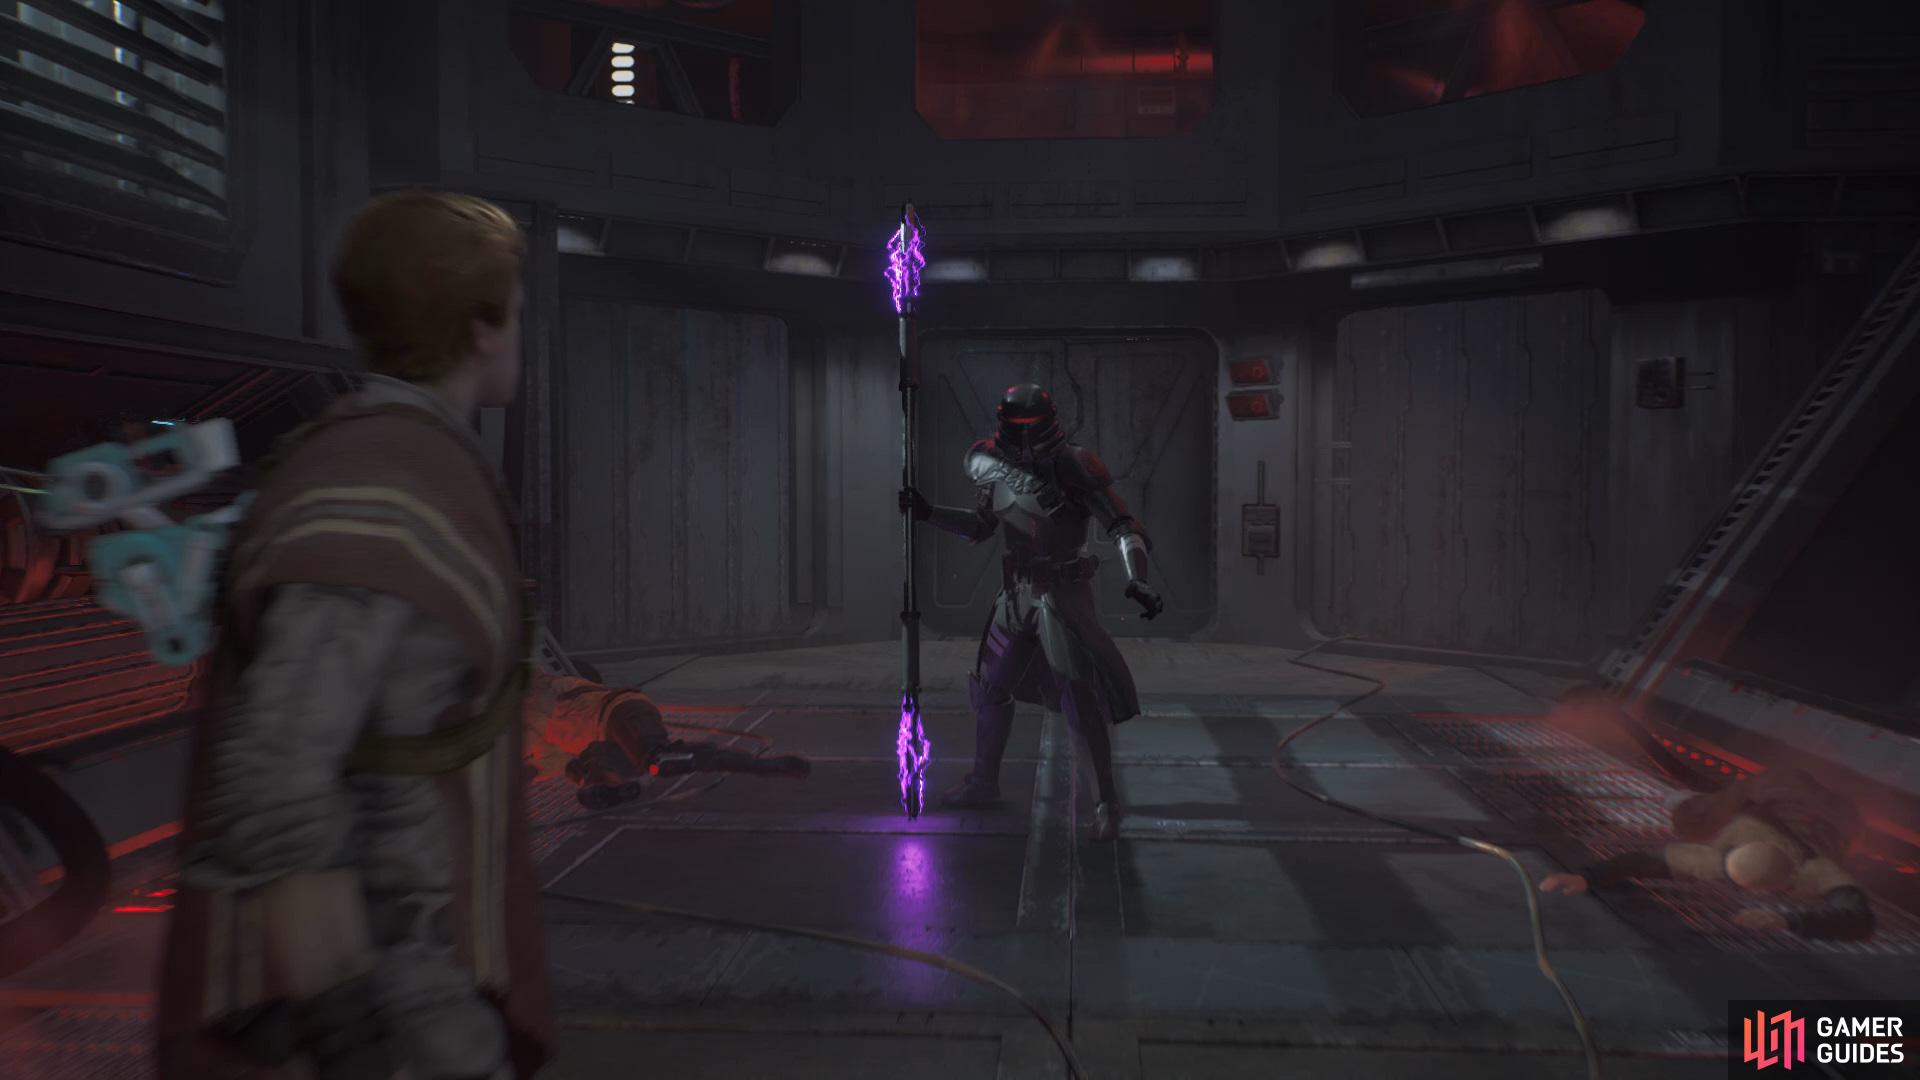 Take out the Electro Trooper by using Force Slow and parrying him